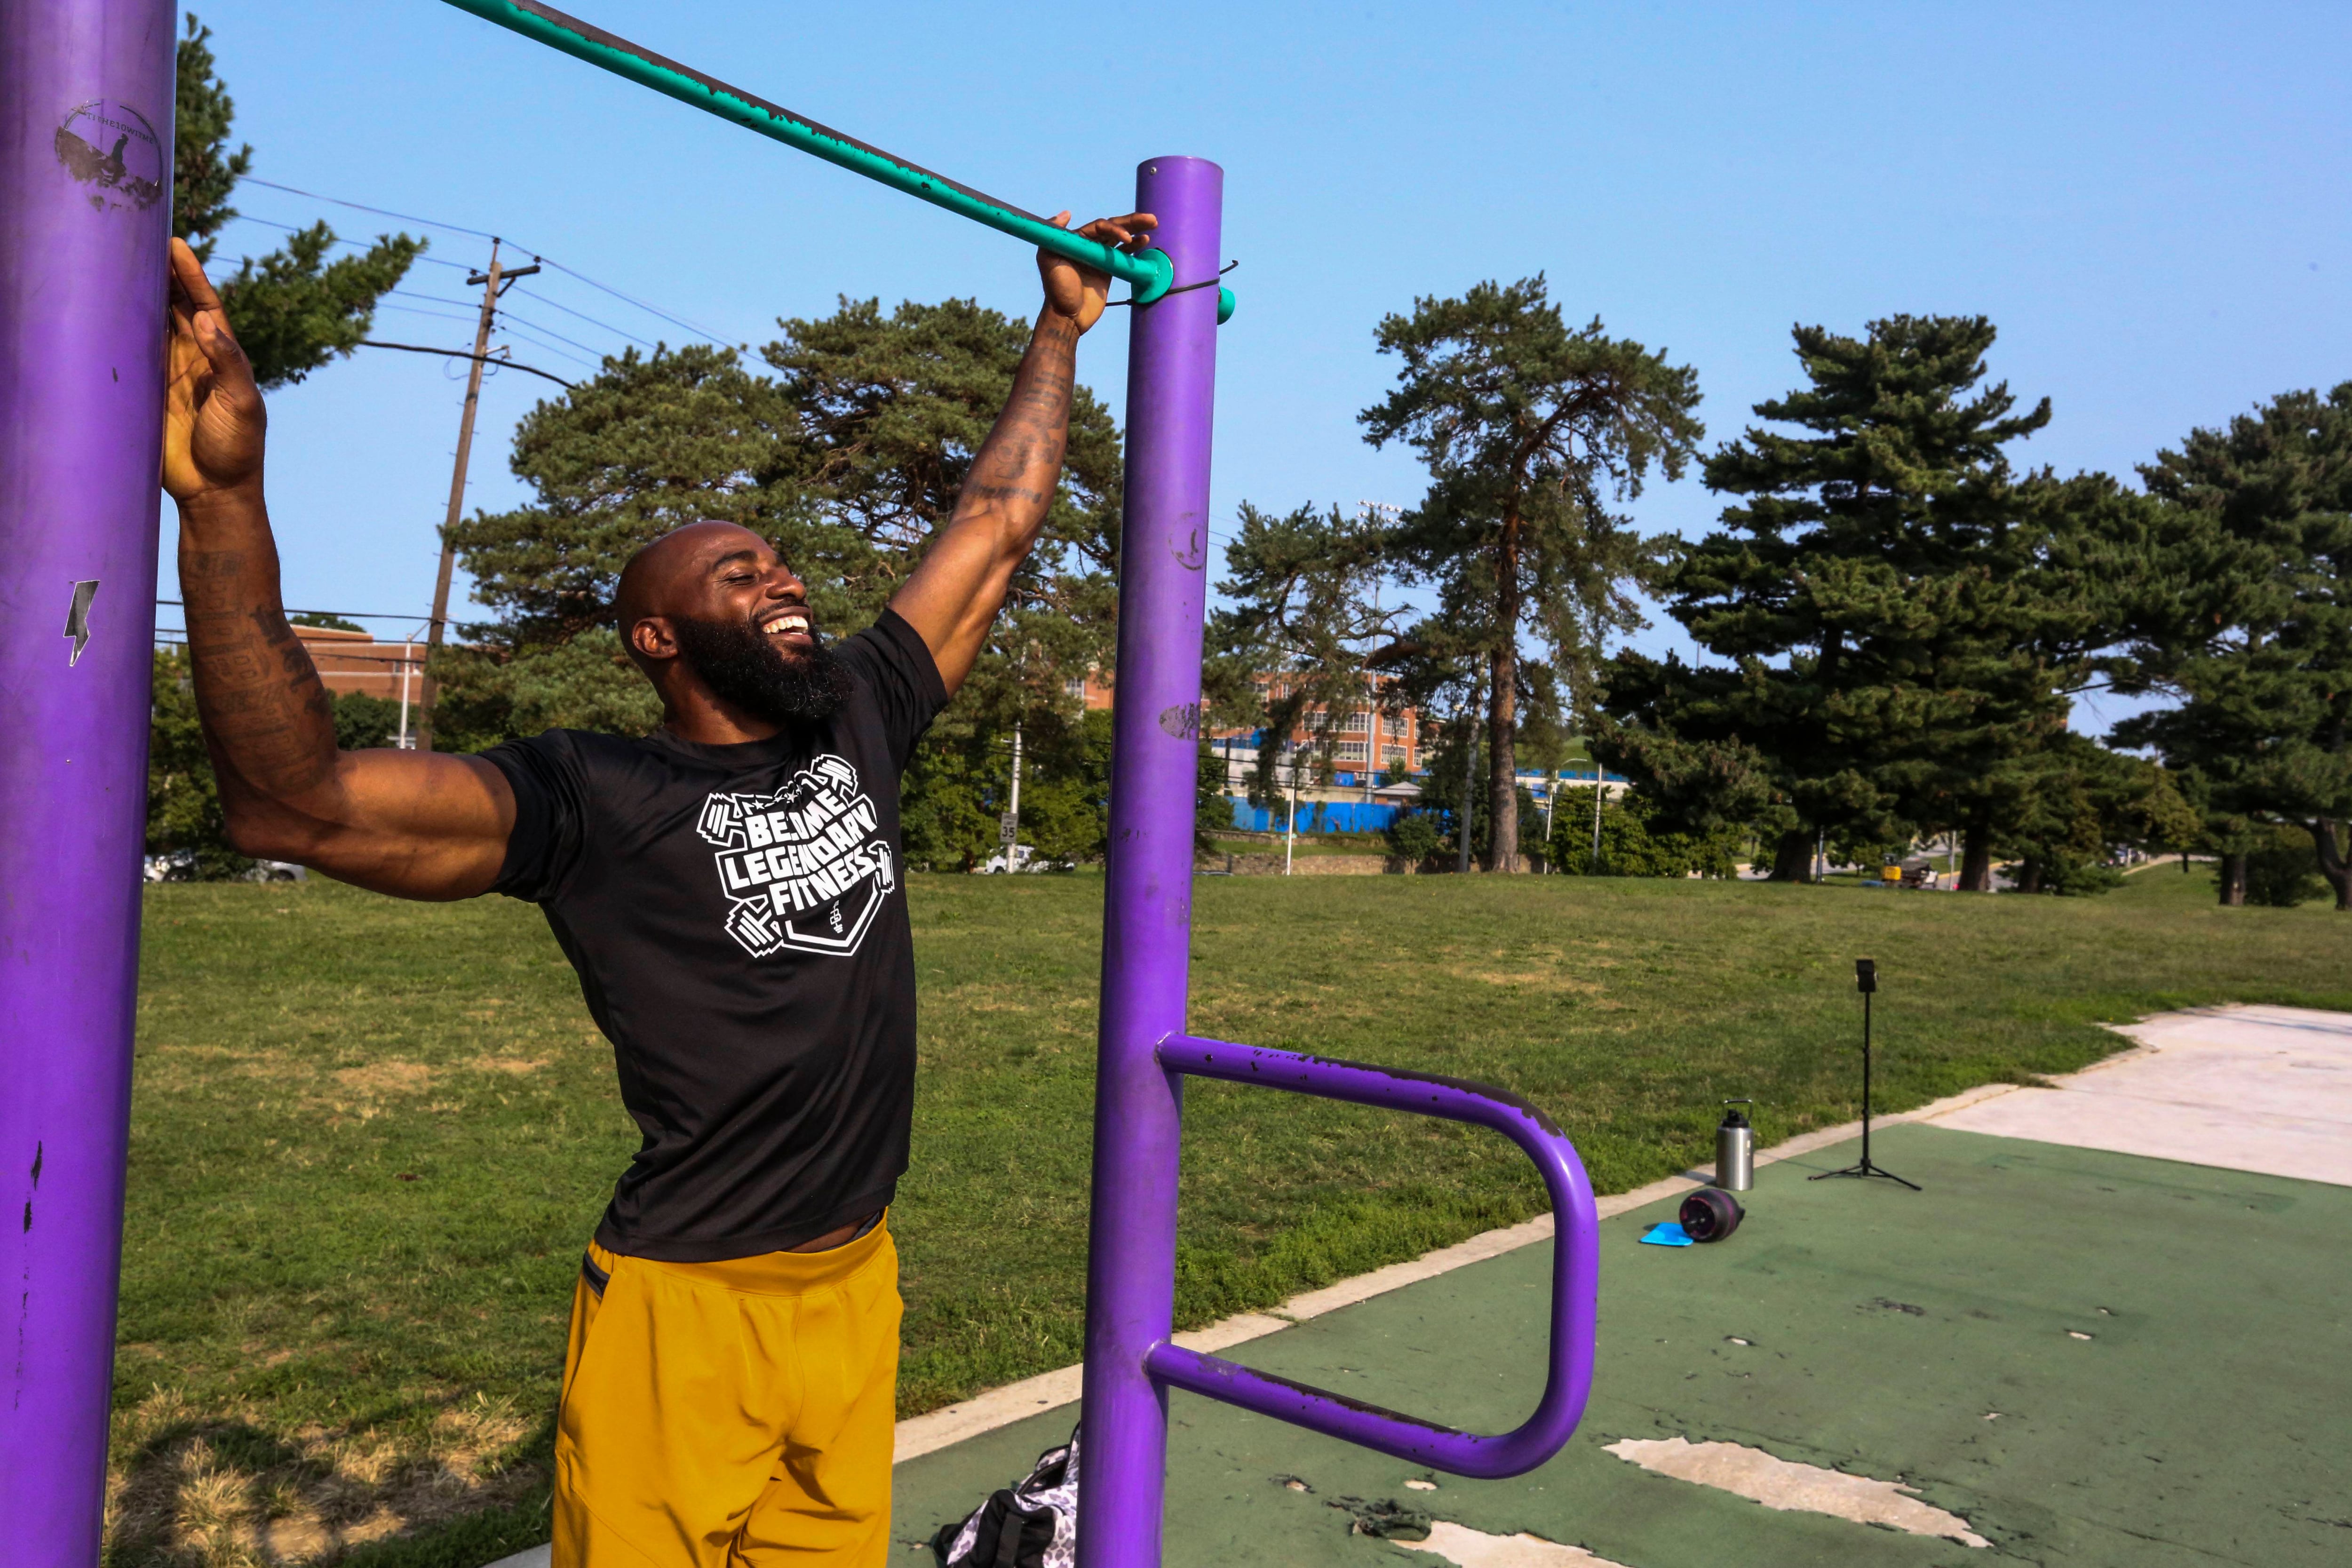 Marcus Hatten, a former basketball player, has been coaching workout classes in the park at Lake Montebello that have attracted a large and dedicted following.